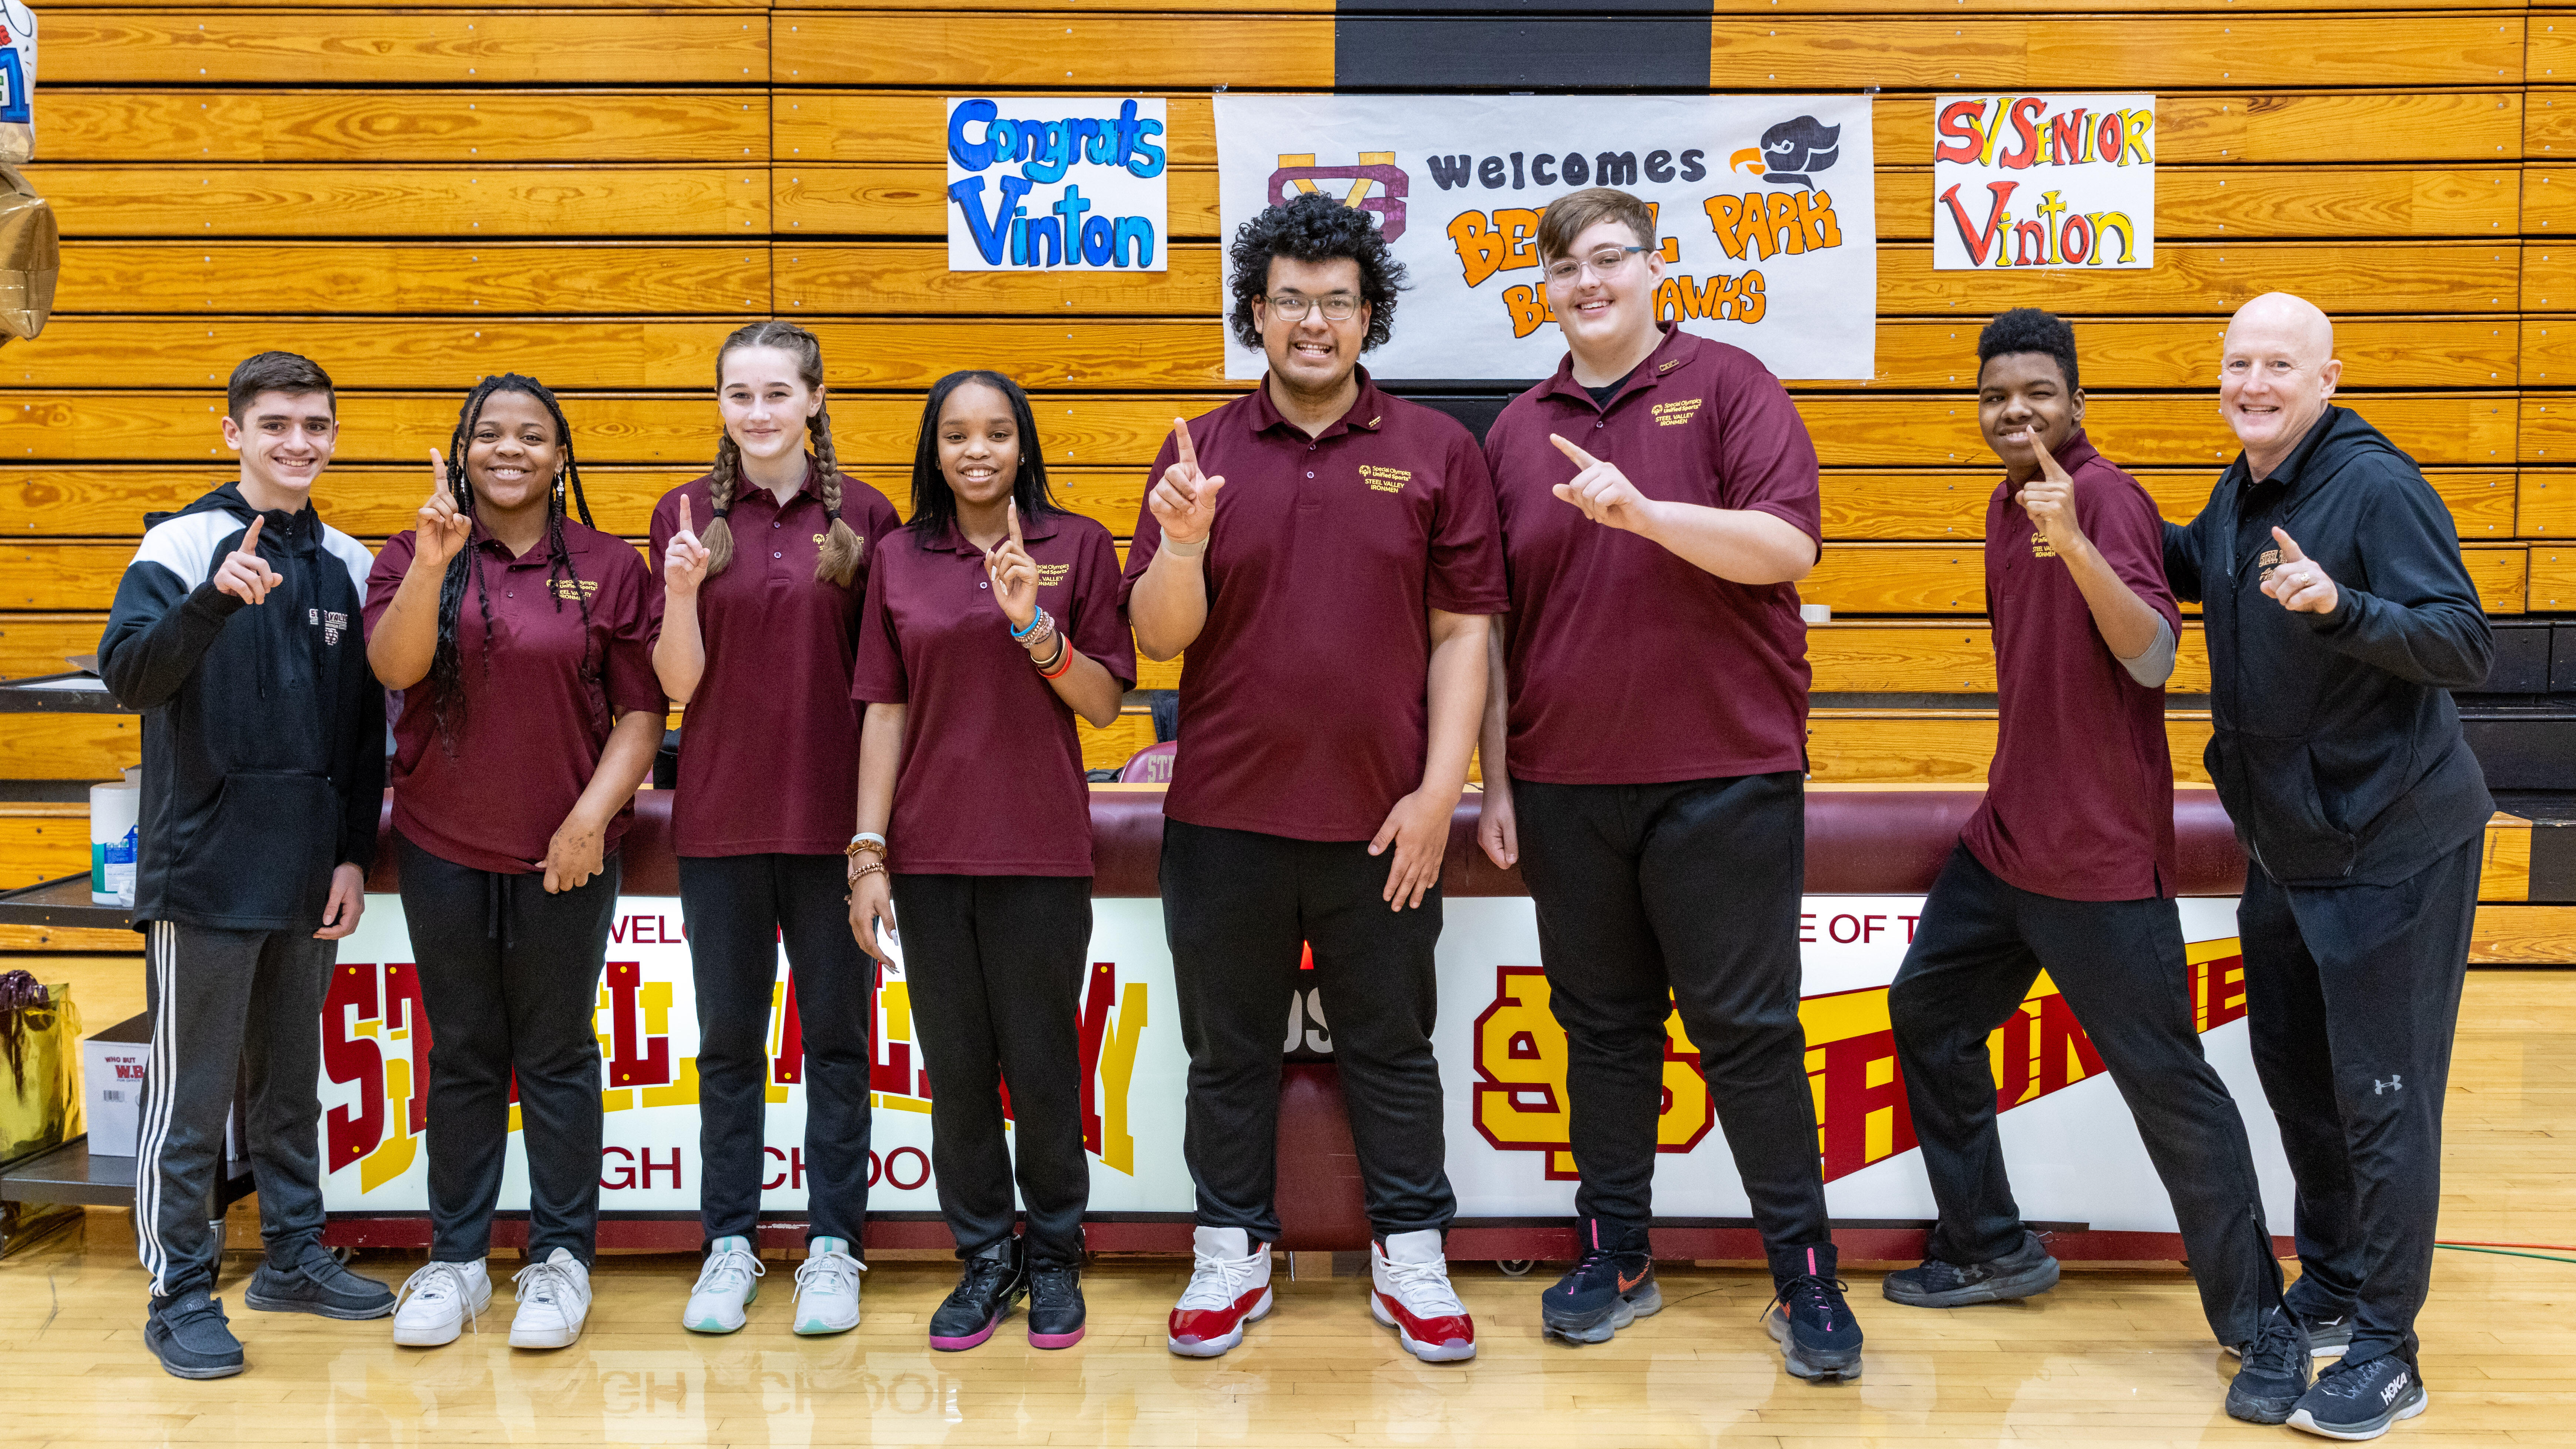 Unified Bocce Team Unites Steel Valley Community